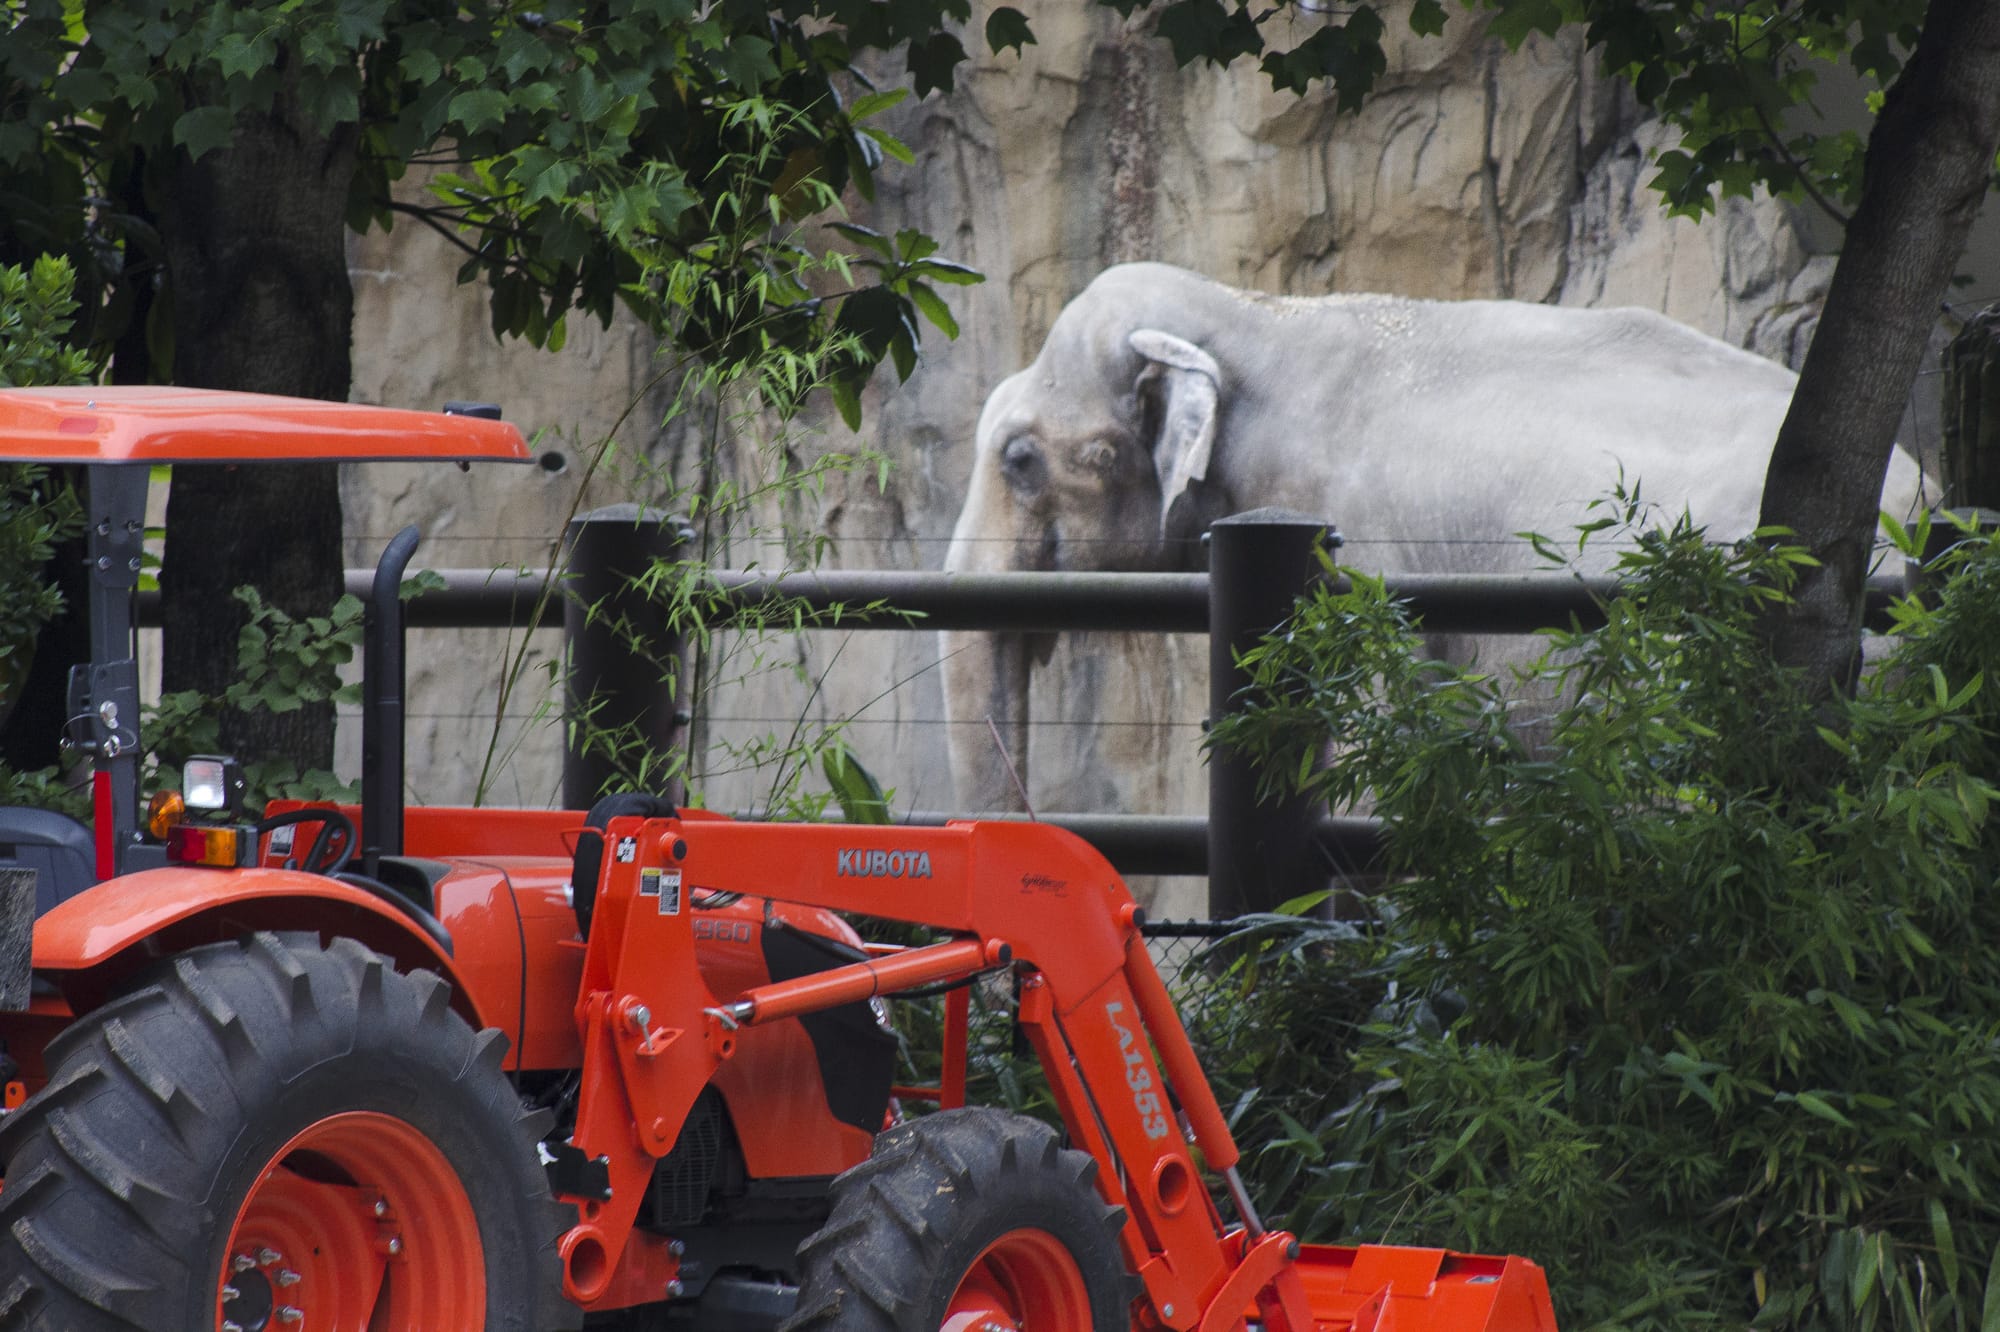 Packy roams his enclosure at the Oregon Zoo in July while construction of the new elephant enclosure and exhibit continues.